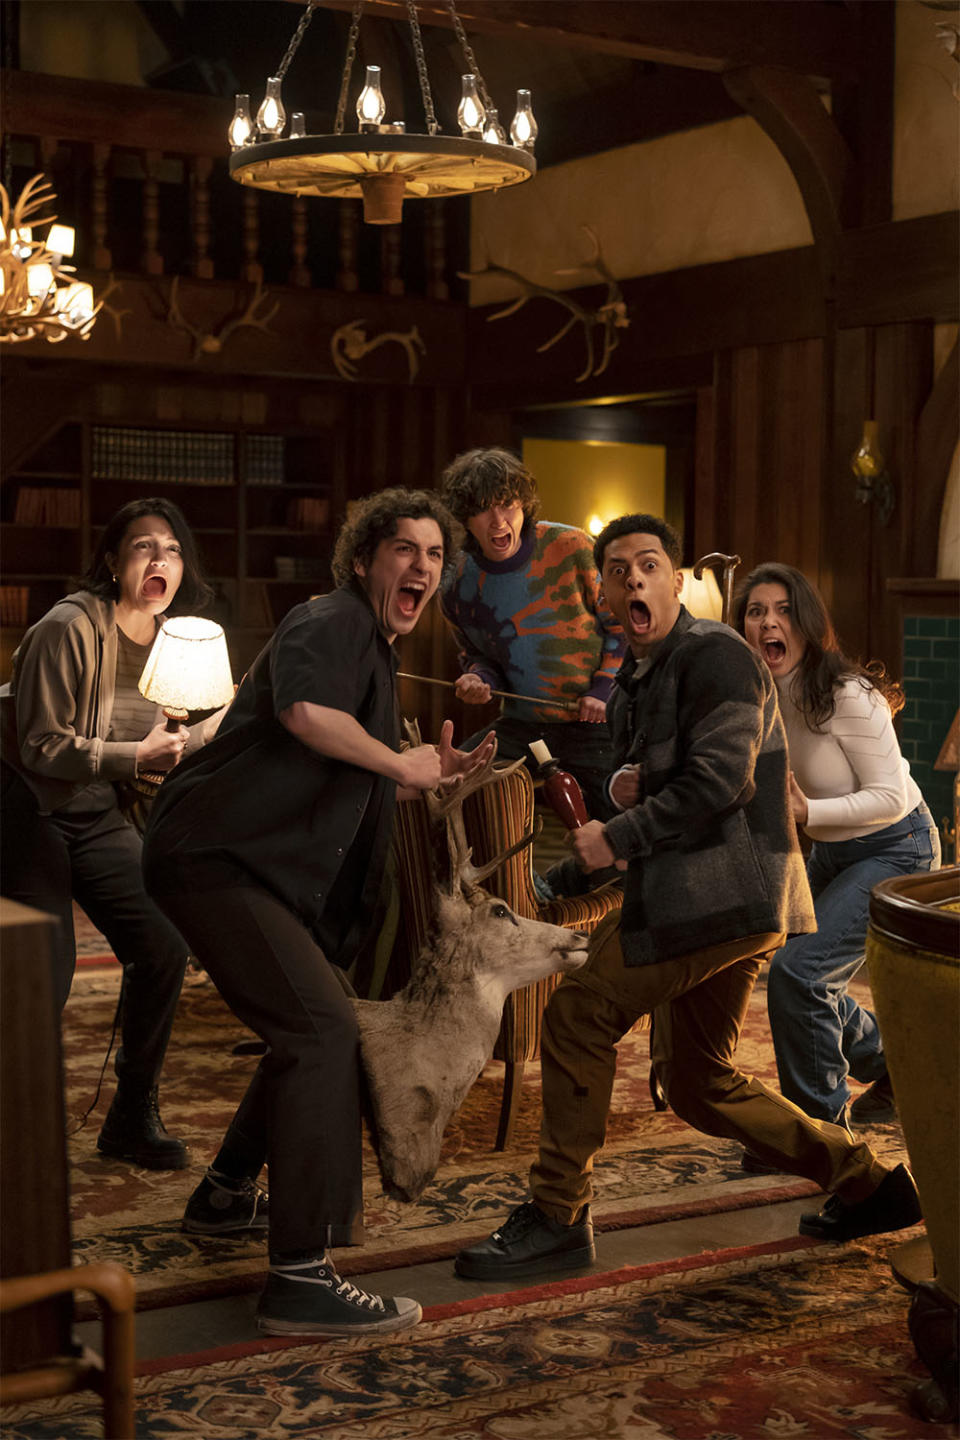 Isa Briones, Will Price, Miles McKenna, Zach Morris, and Ana Yi Puig in Goosebumps